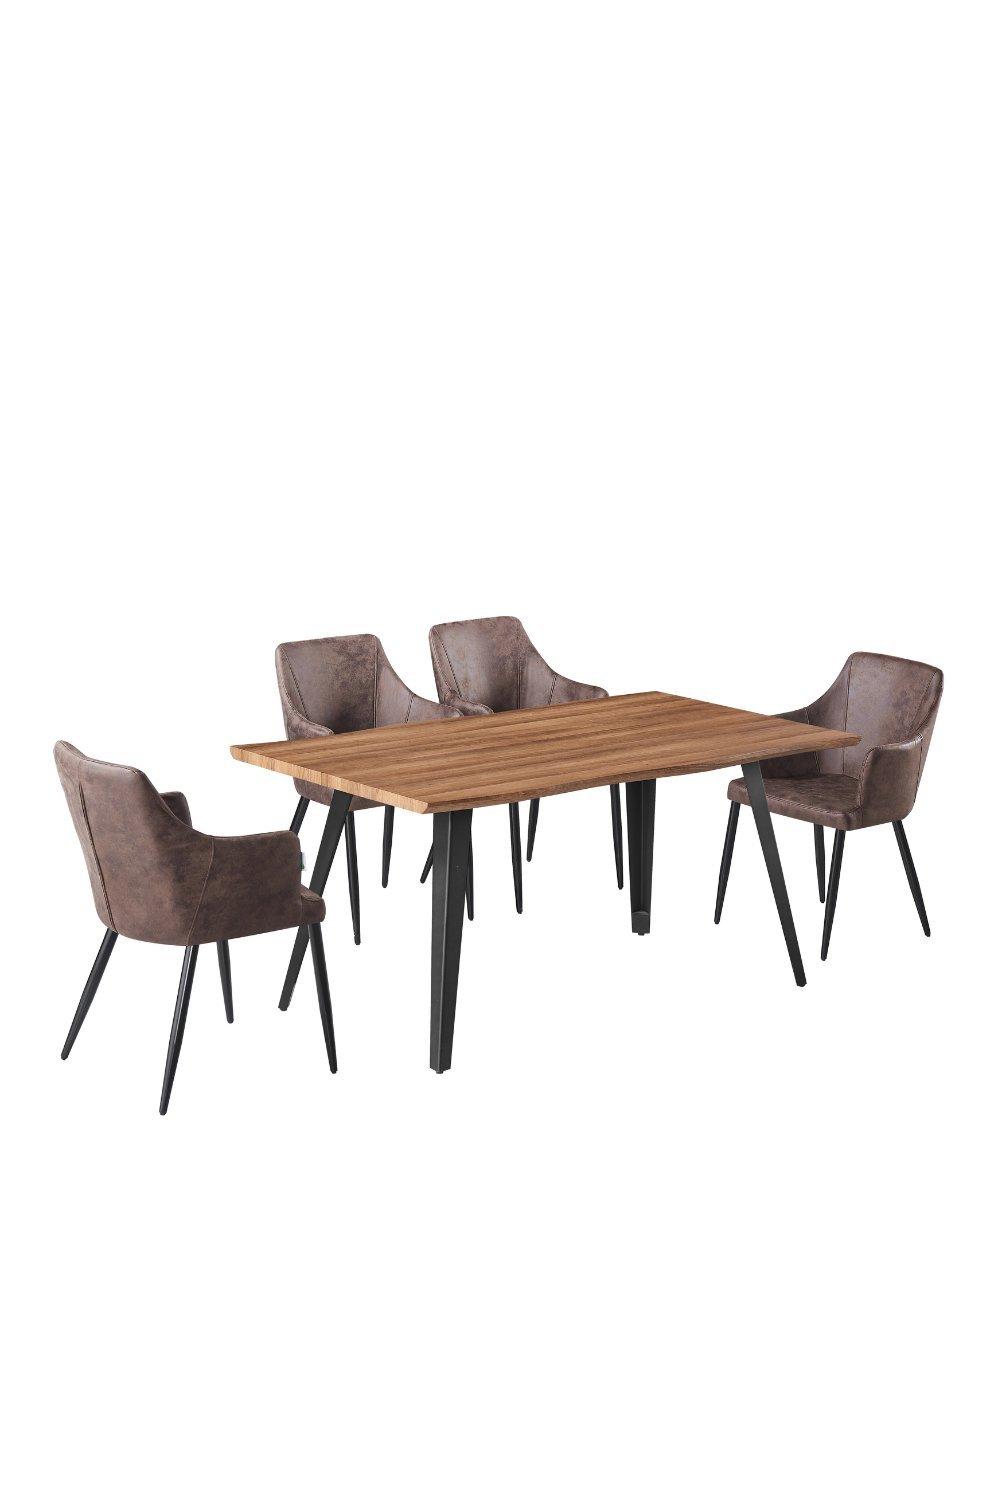 'Zarah Rocco' Dining Set with a Table and 4 Chairs